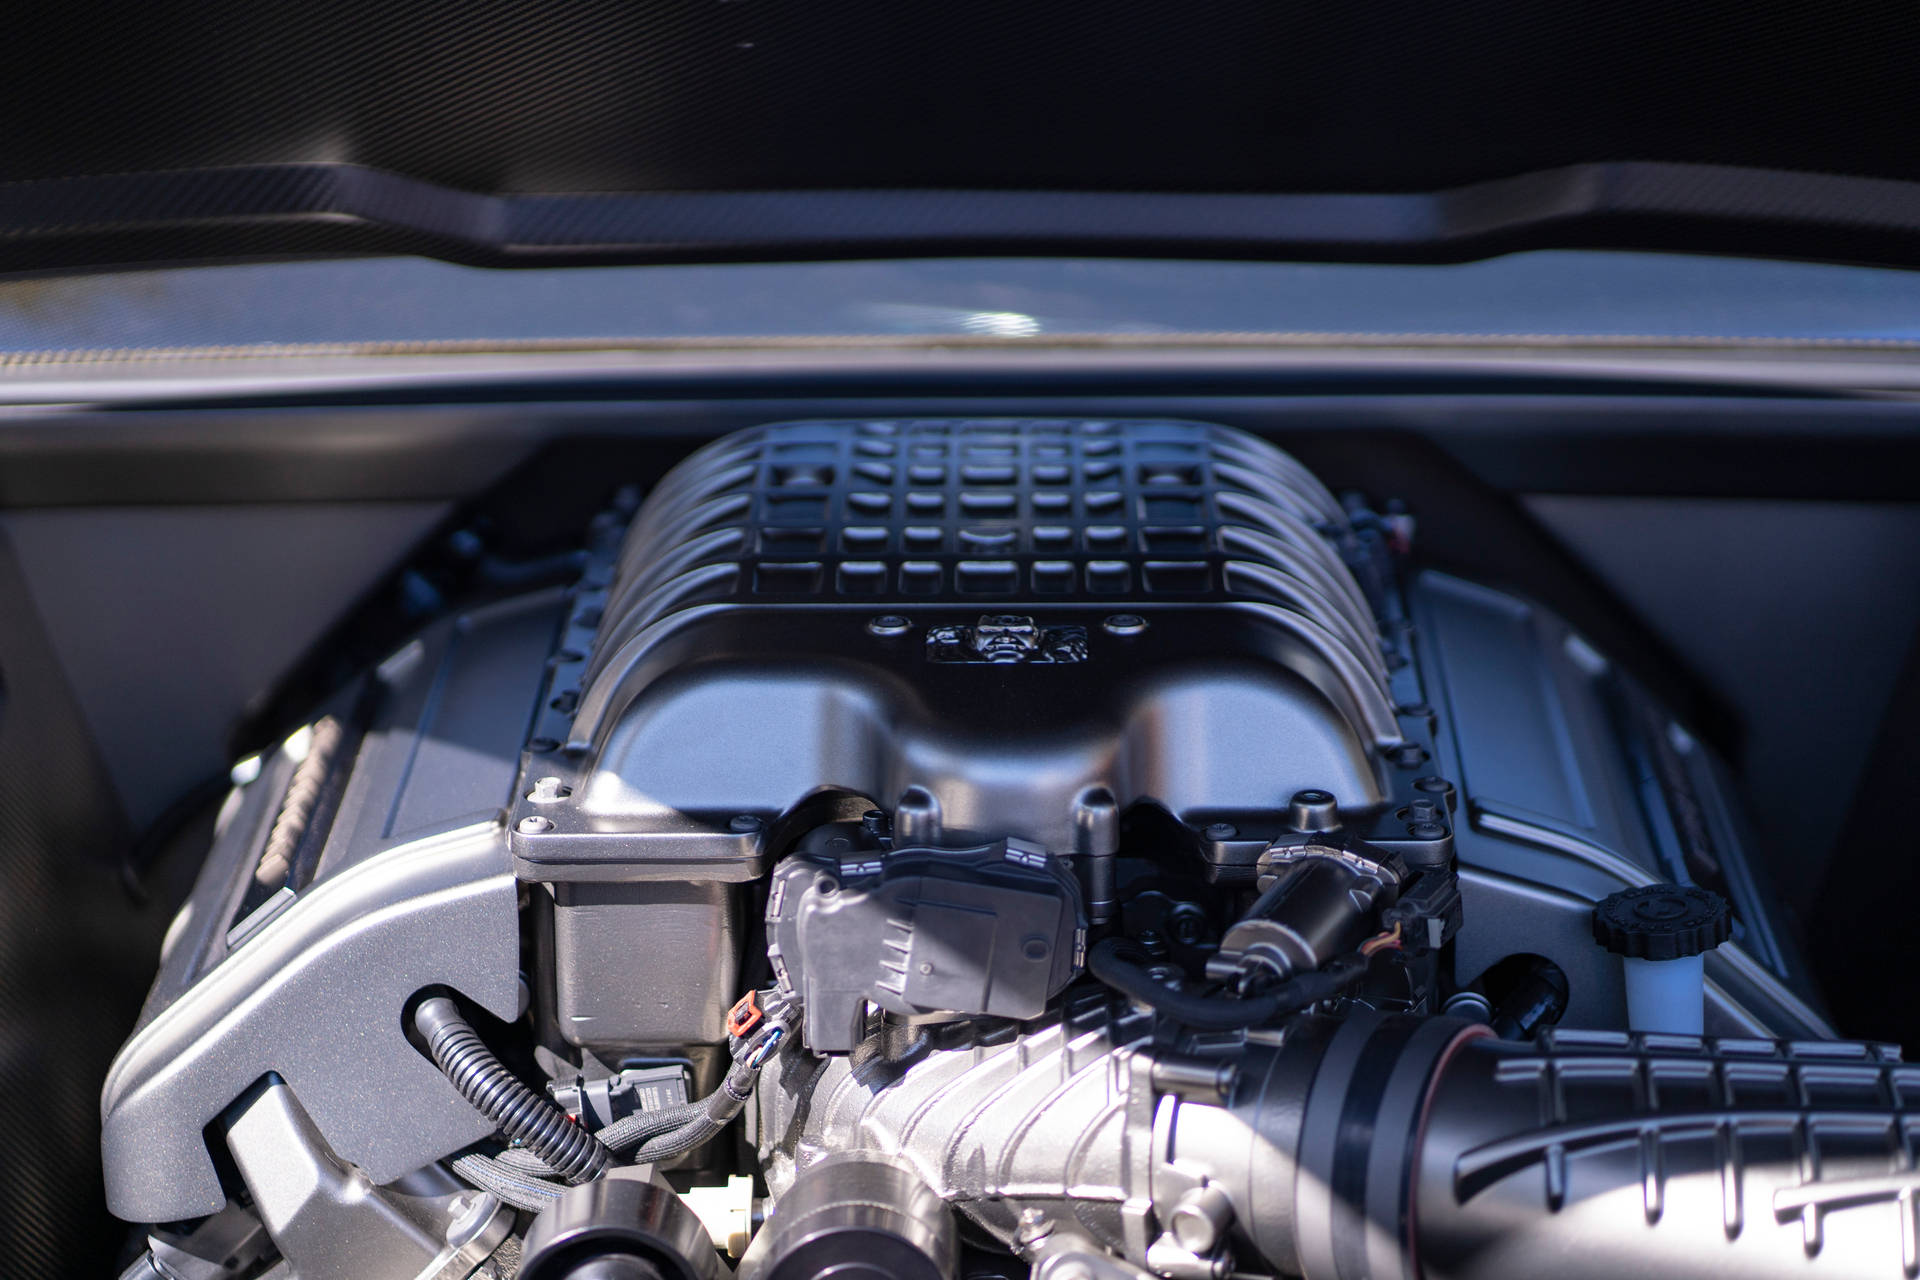 An Up-Close Look at a Black and Silver Car Engine Wallpaper